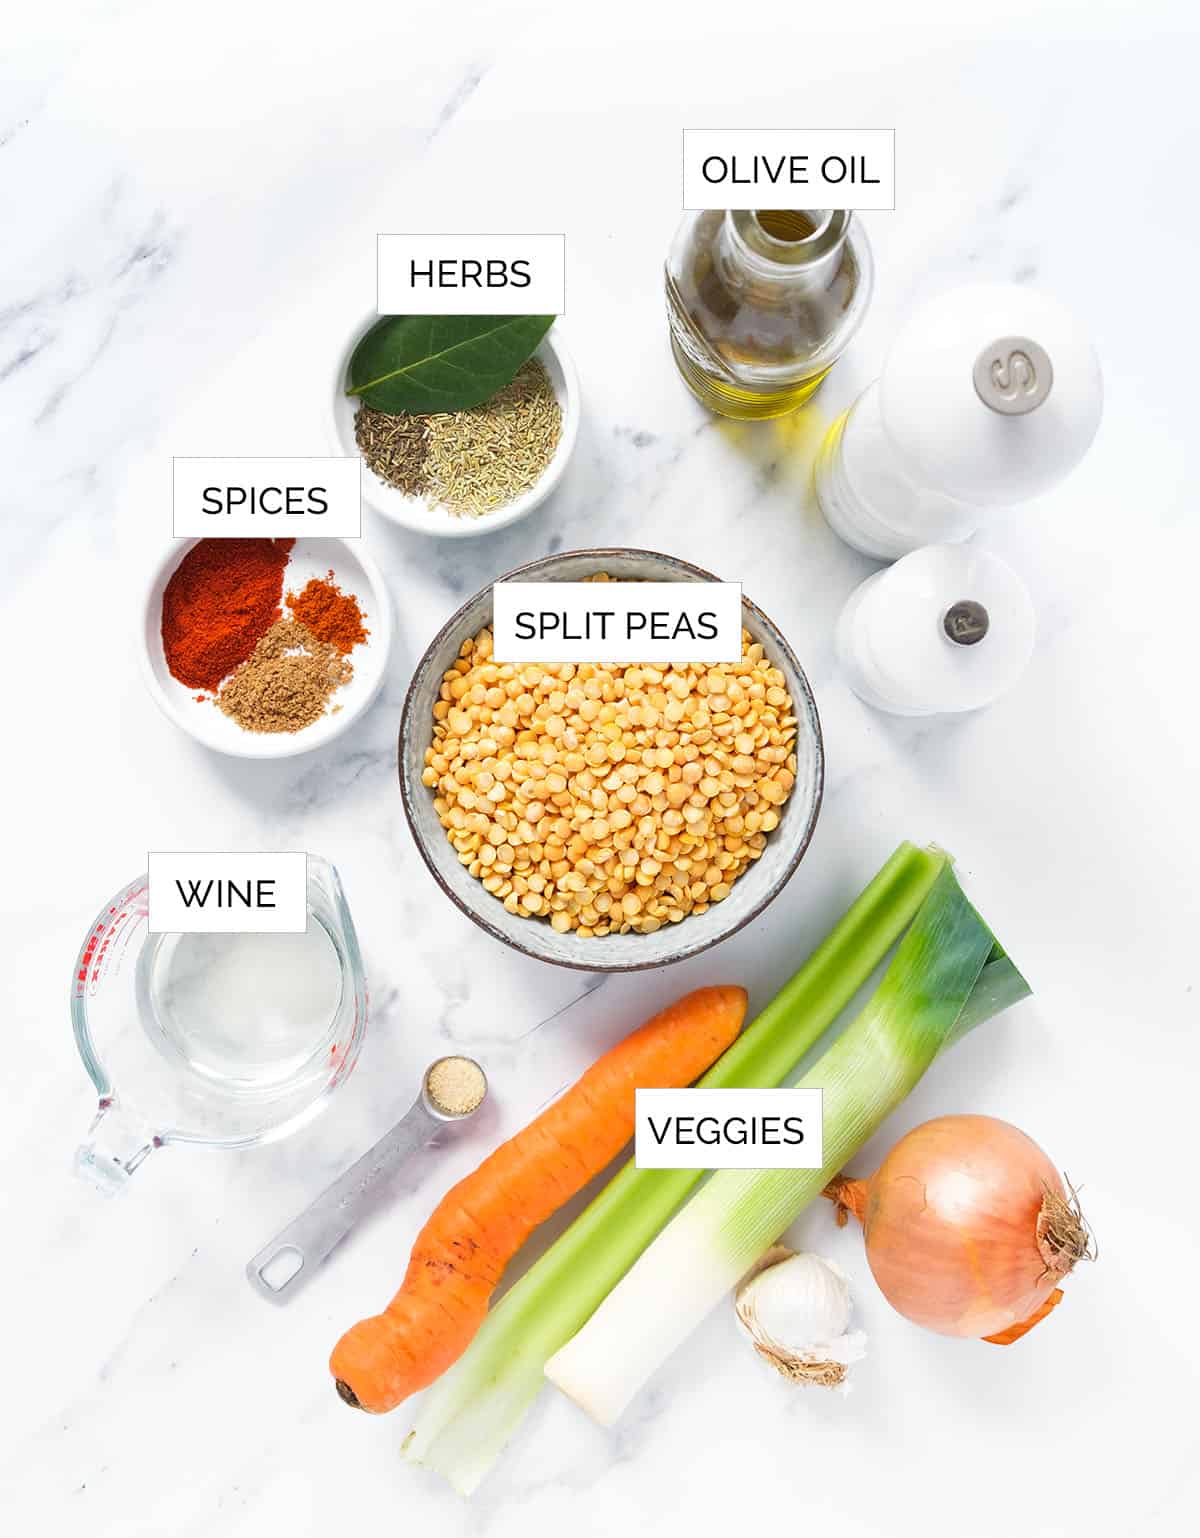 The ingredients to make this vegan split pea soup are arranged over a white background.